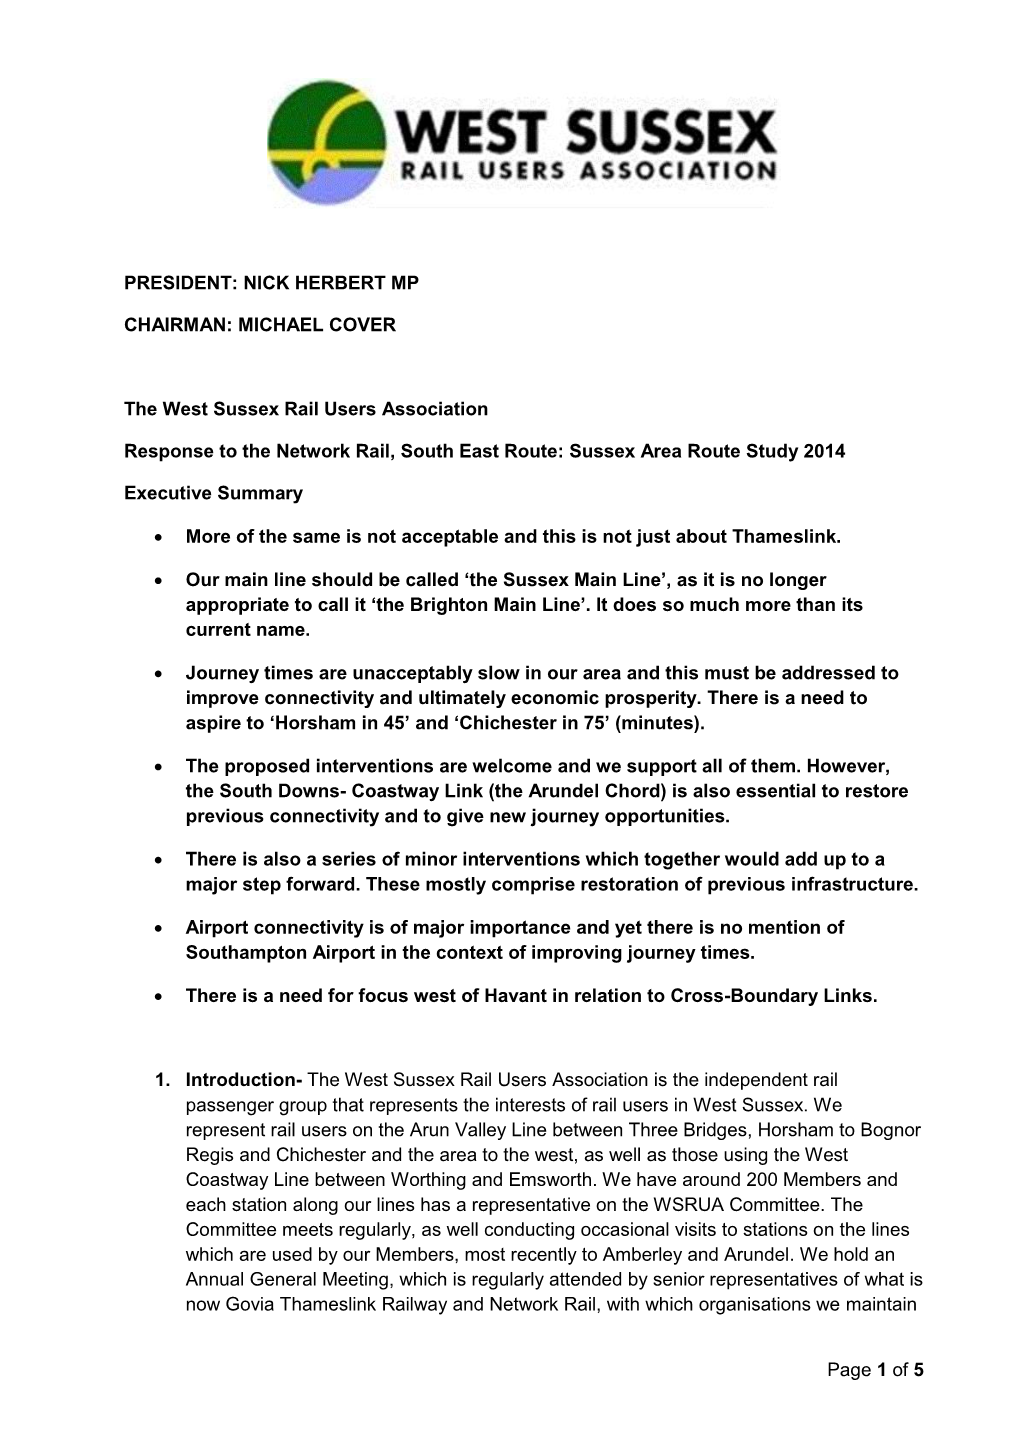 Page 1 of 5 PRESIDENT: NICK HERBERT MP CHAIRMAN: MICHAEL COVER the West Sussex Rail Users Association Response to the Network Ra